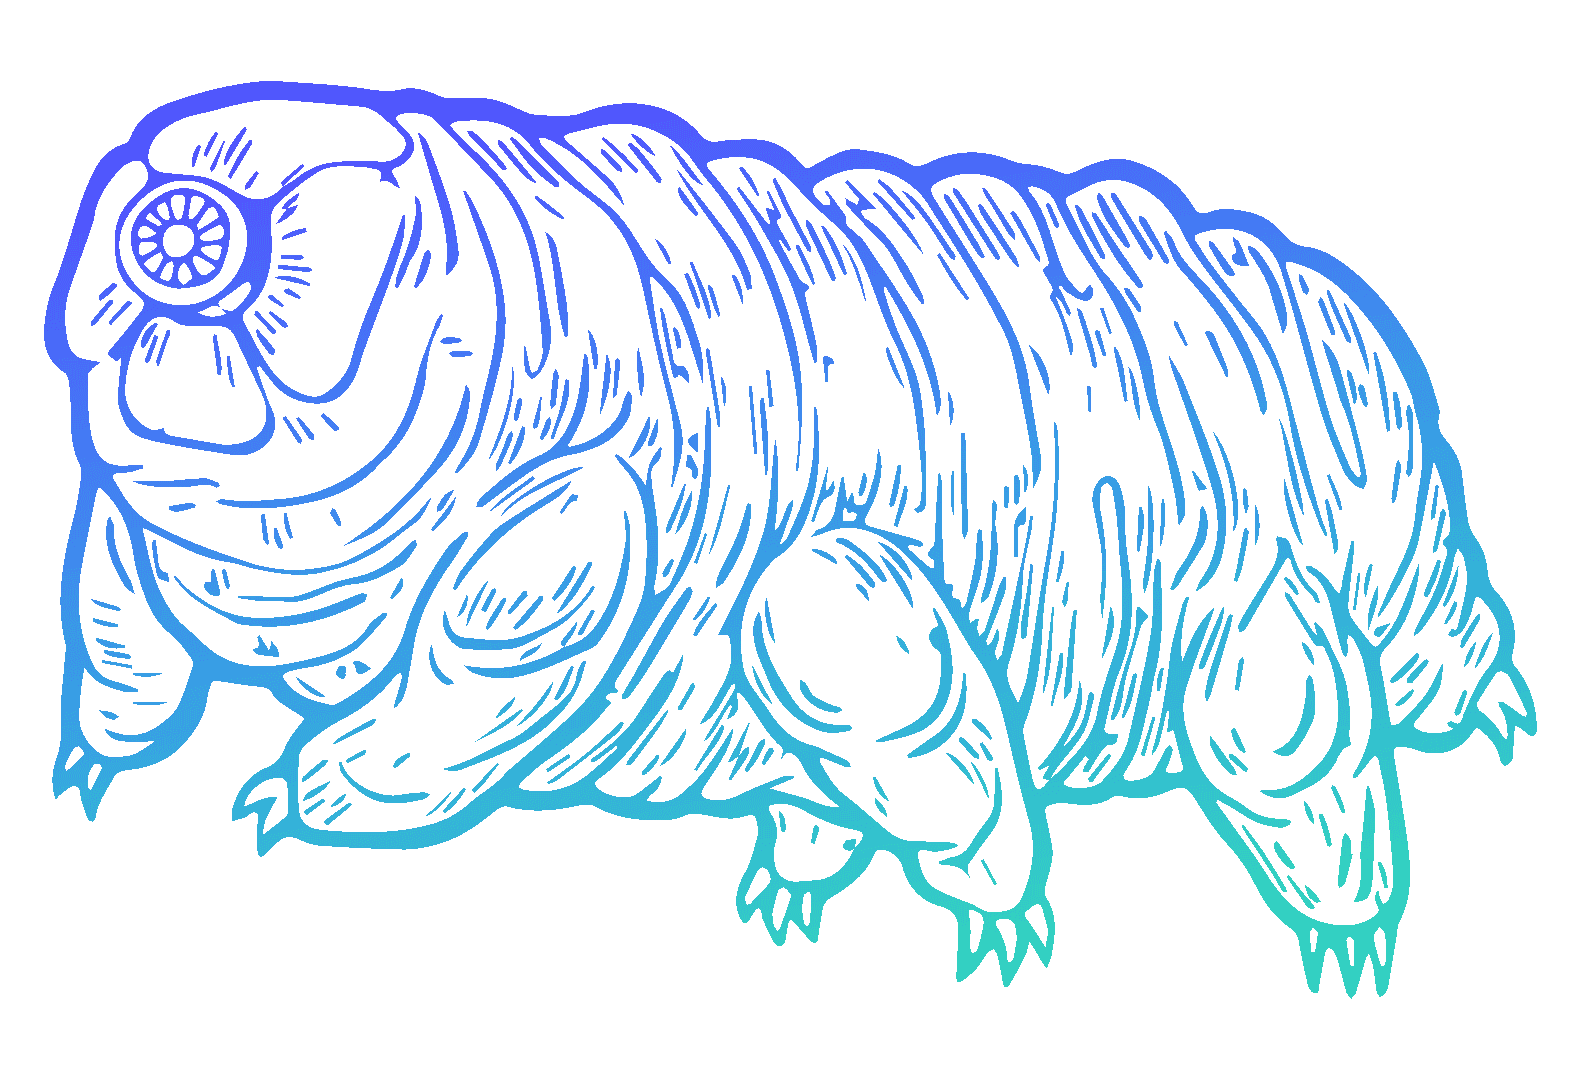 An image of the ZeroTier Tardigrade mascot. Stylized but accurate line drawing of a microscopic creature with 6 legs a resilient microorganism known for its ability to survive in extreme conditions including outer space